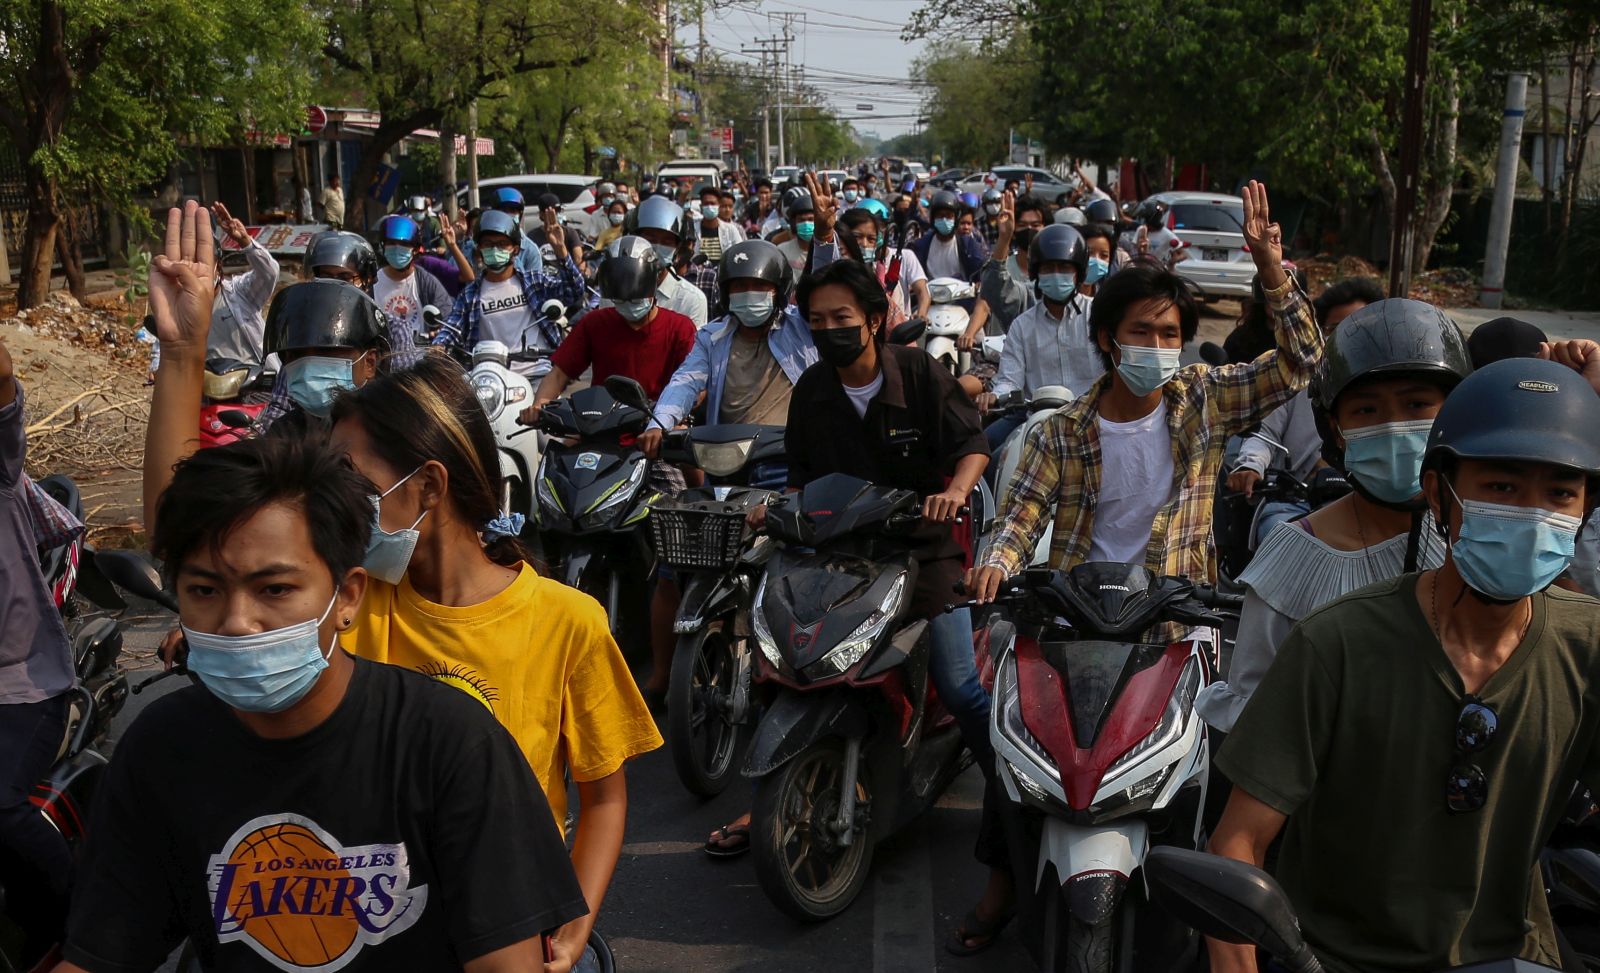 epa09134199 Demonstrators on motorcycles flash the three-finger salute during an anti-military coup protest in Mandalay, Myanmar, 14 April 2021. According to the Assistance Association for Political Prisoners (AAPP), at least 700 people have been killed by Myanmar armed forces since the military seized power on 01 February 2021. Protests continue despite the intensifying crackdown on demonstrators.  EPA/STRINGER